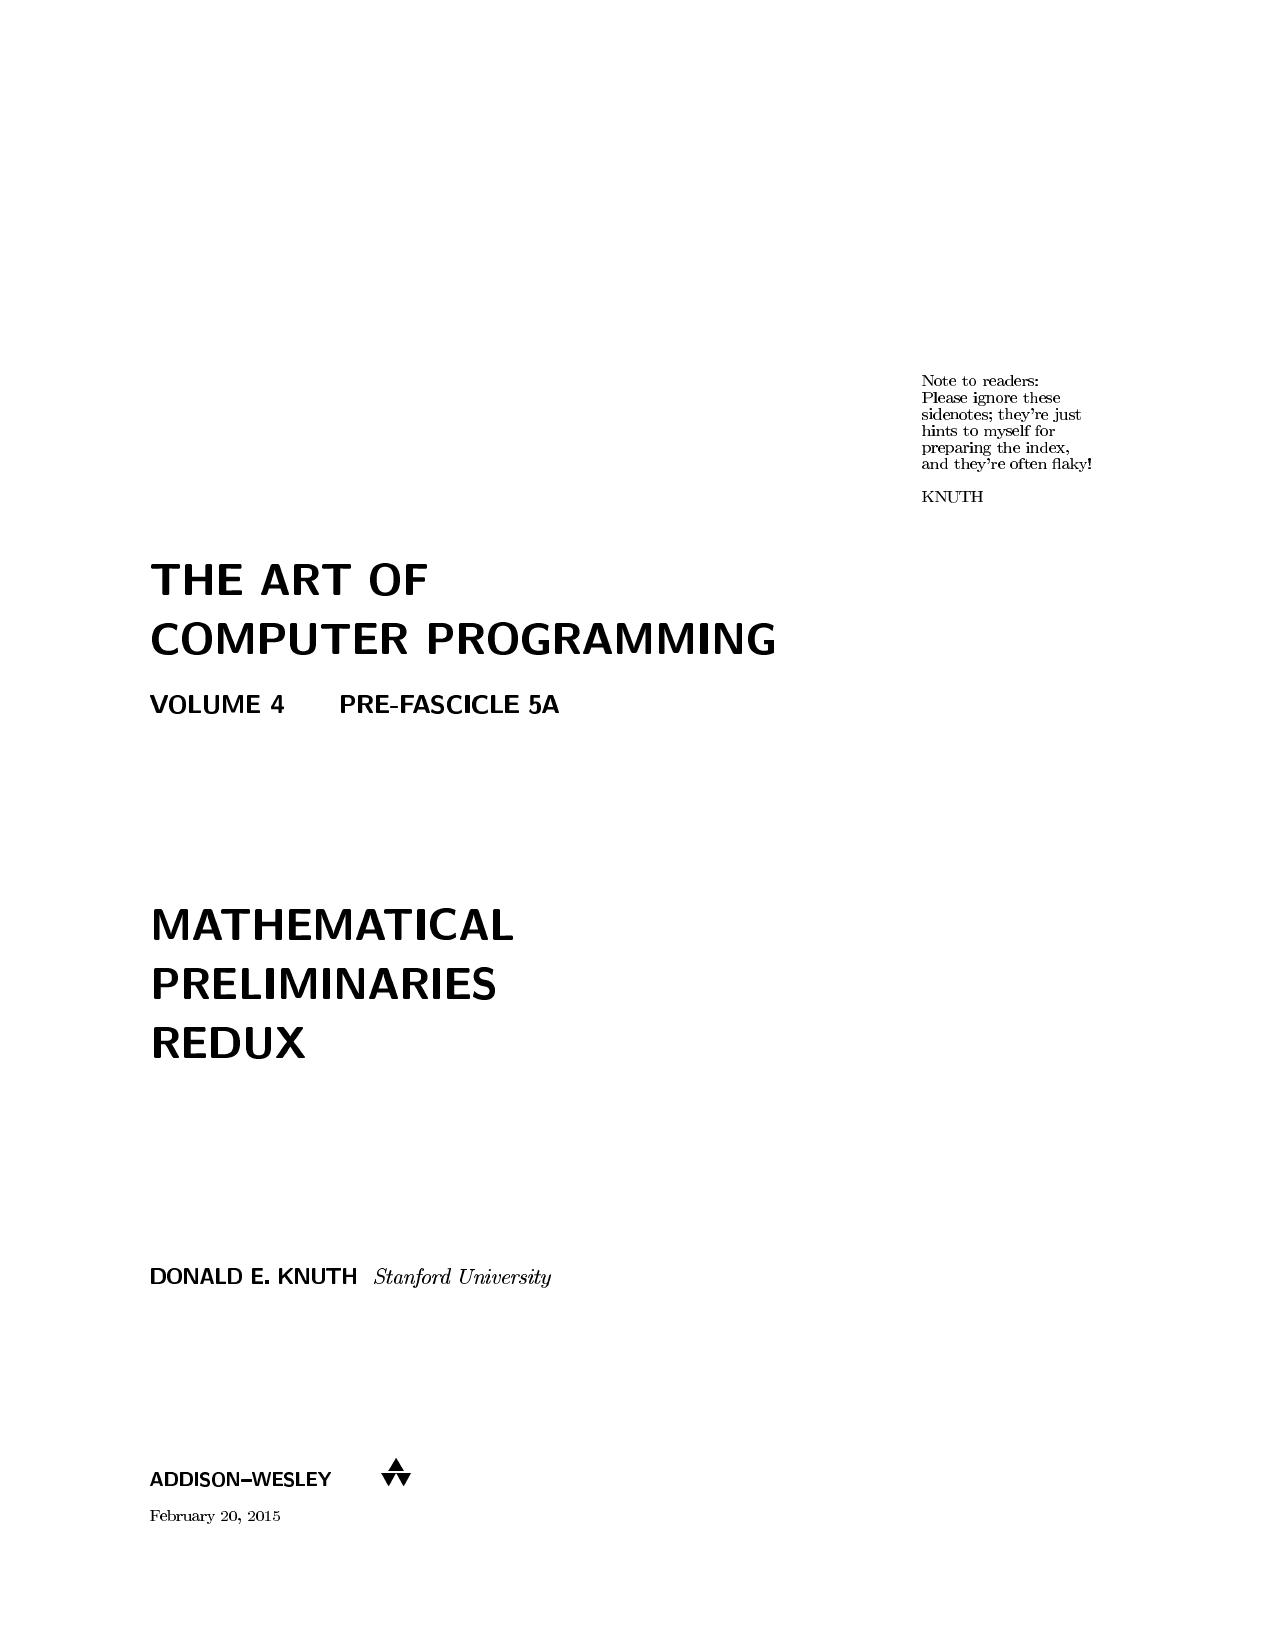 The Art of Computer Programming. Volume 4, Pre-Fascicle 5A Mathematical Preliminaries Redux